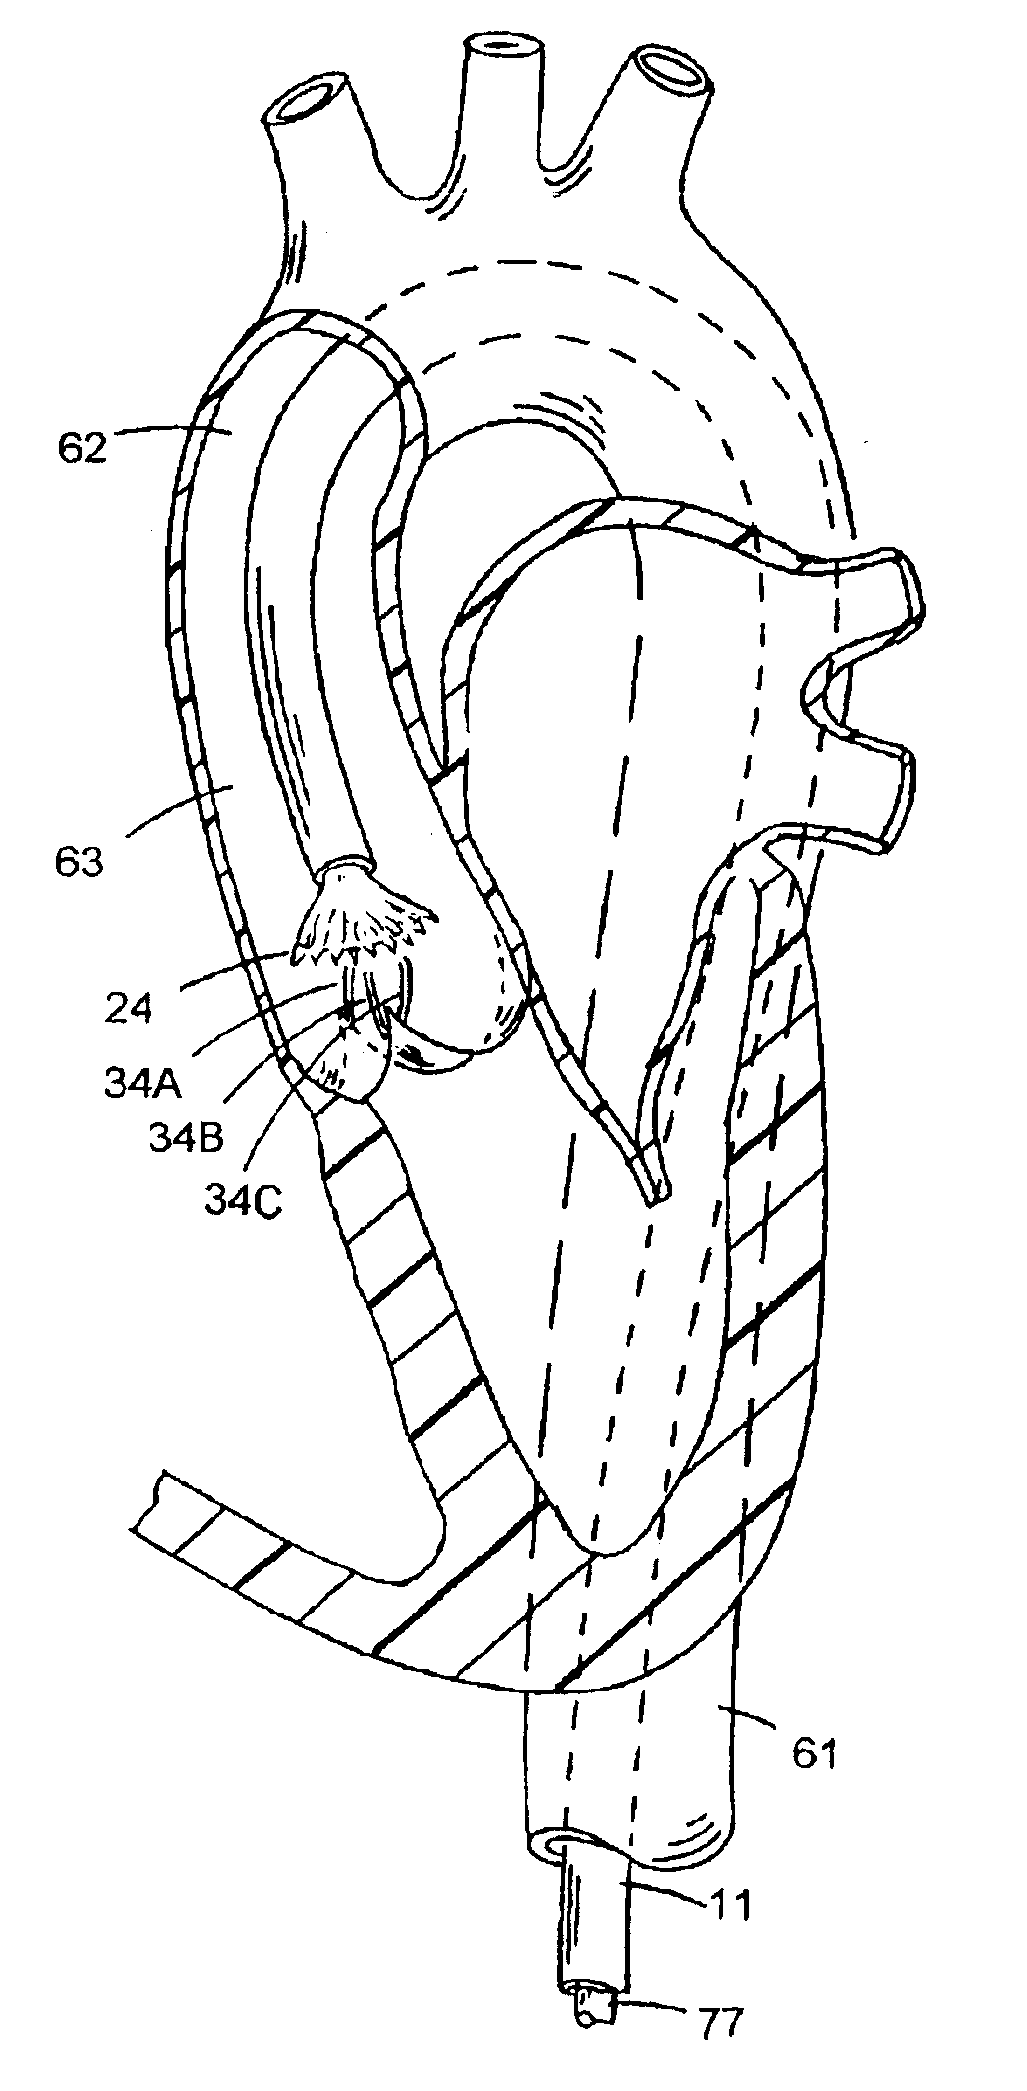 Apparatus and methods for valve removal